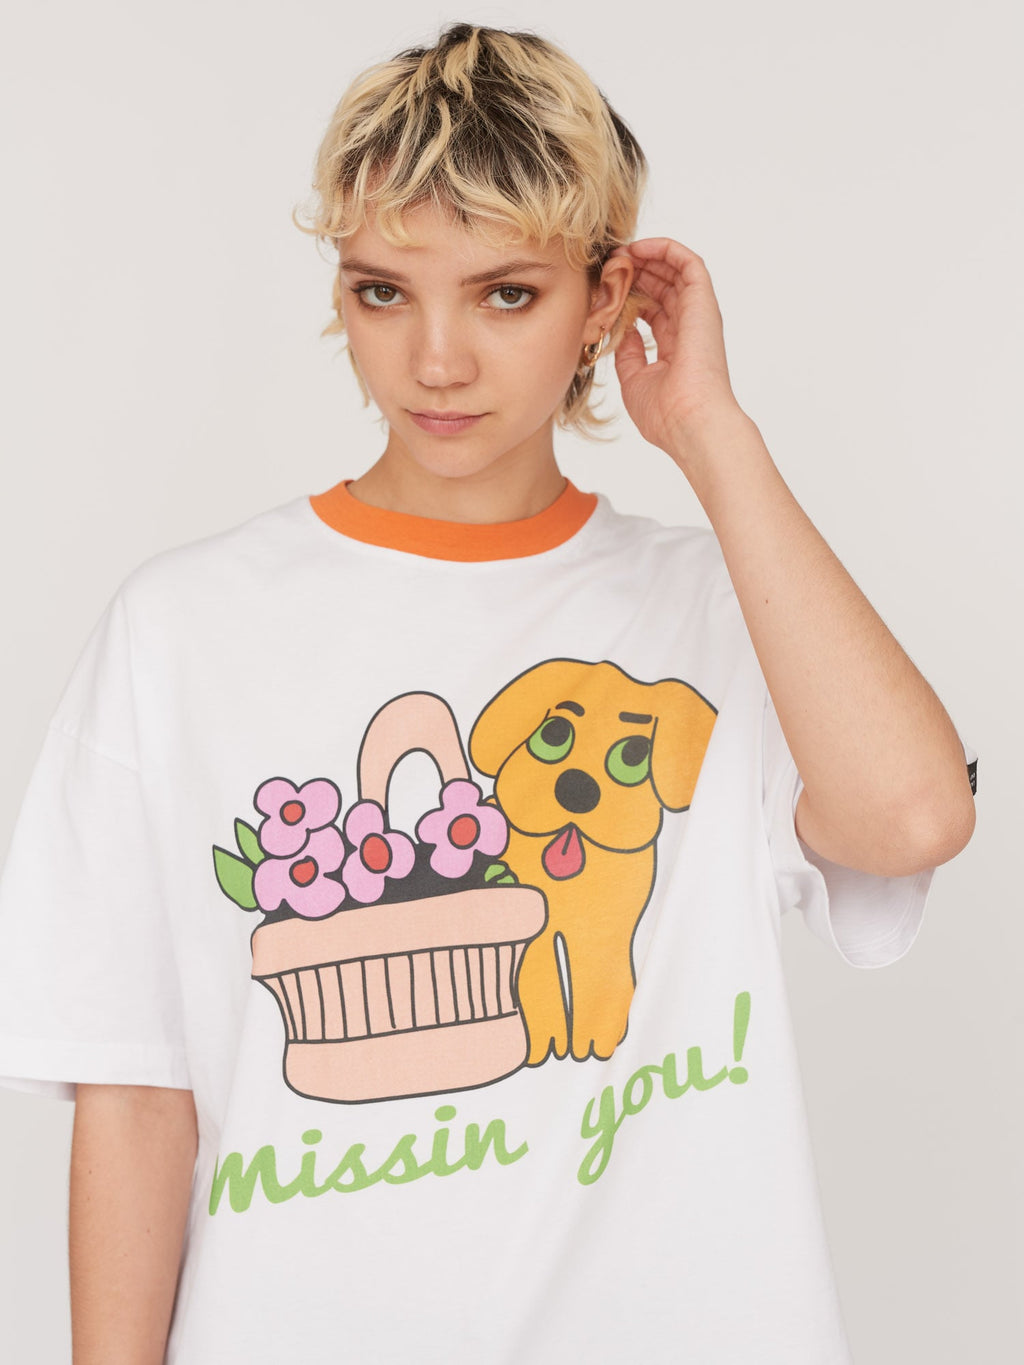 Missing You T-Shirt